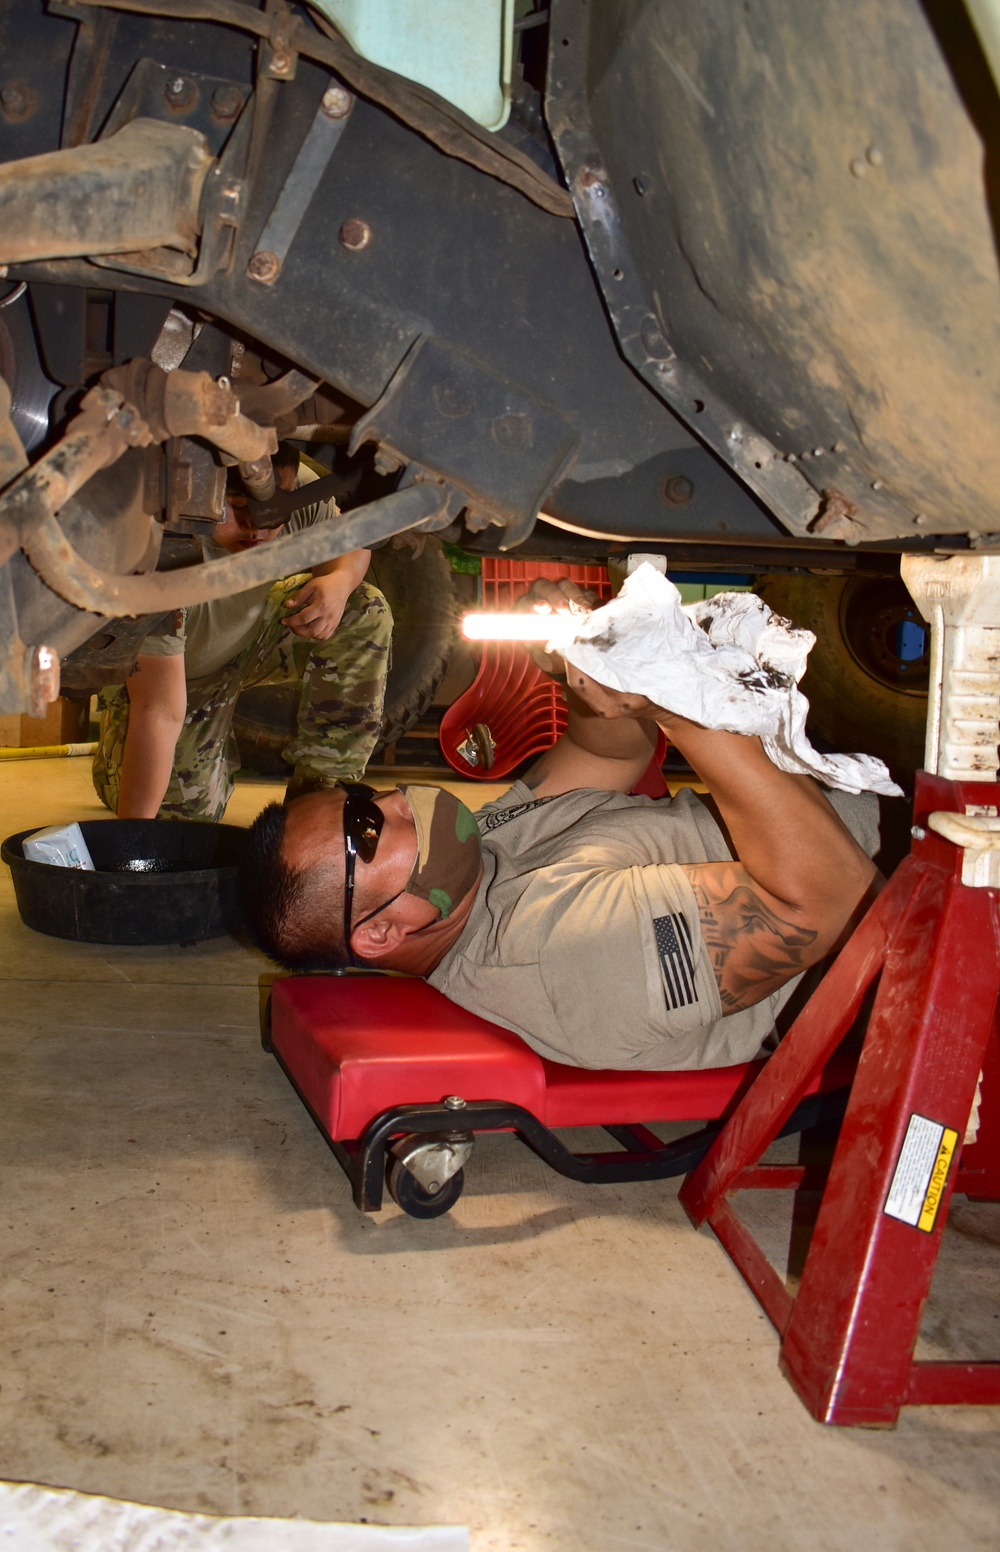 HIARNG Soldiers conduct maintenance operations during COVID-19